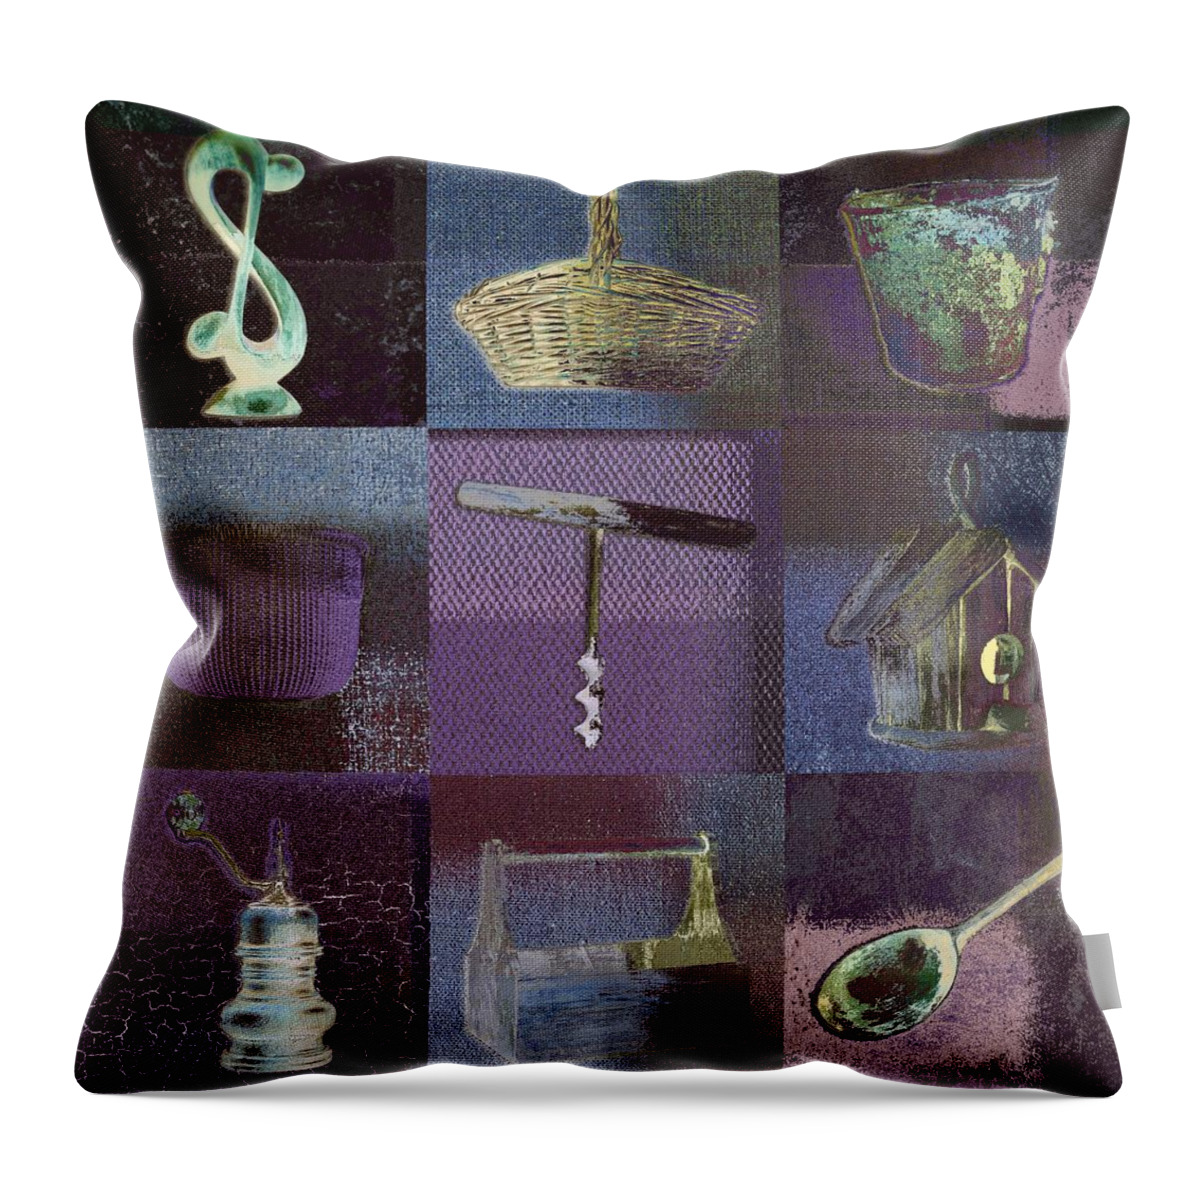 Squares Throw Pillow featuring the digital art Multi Home decor - bz01 by Variance Collections